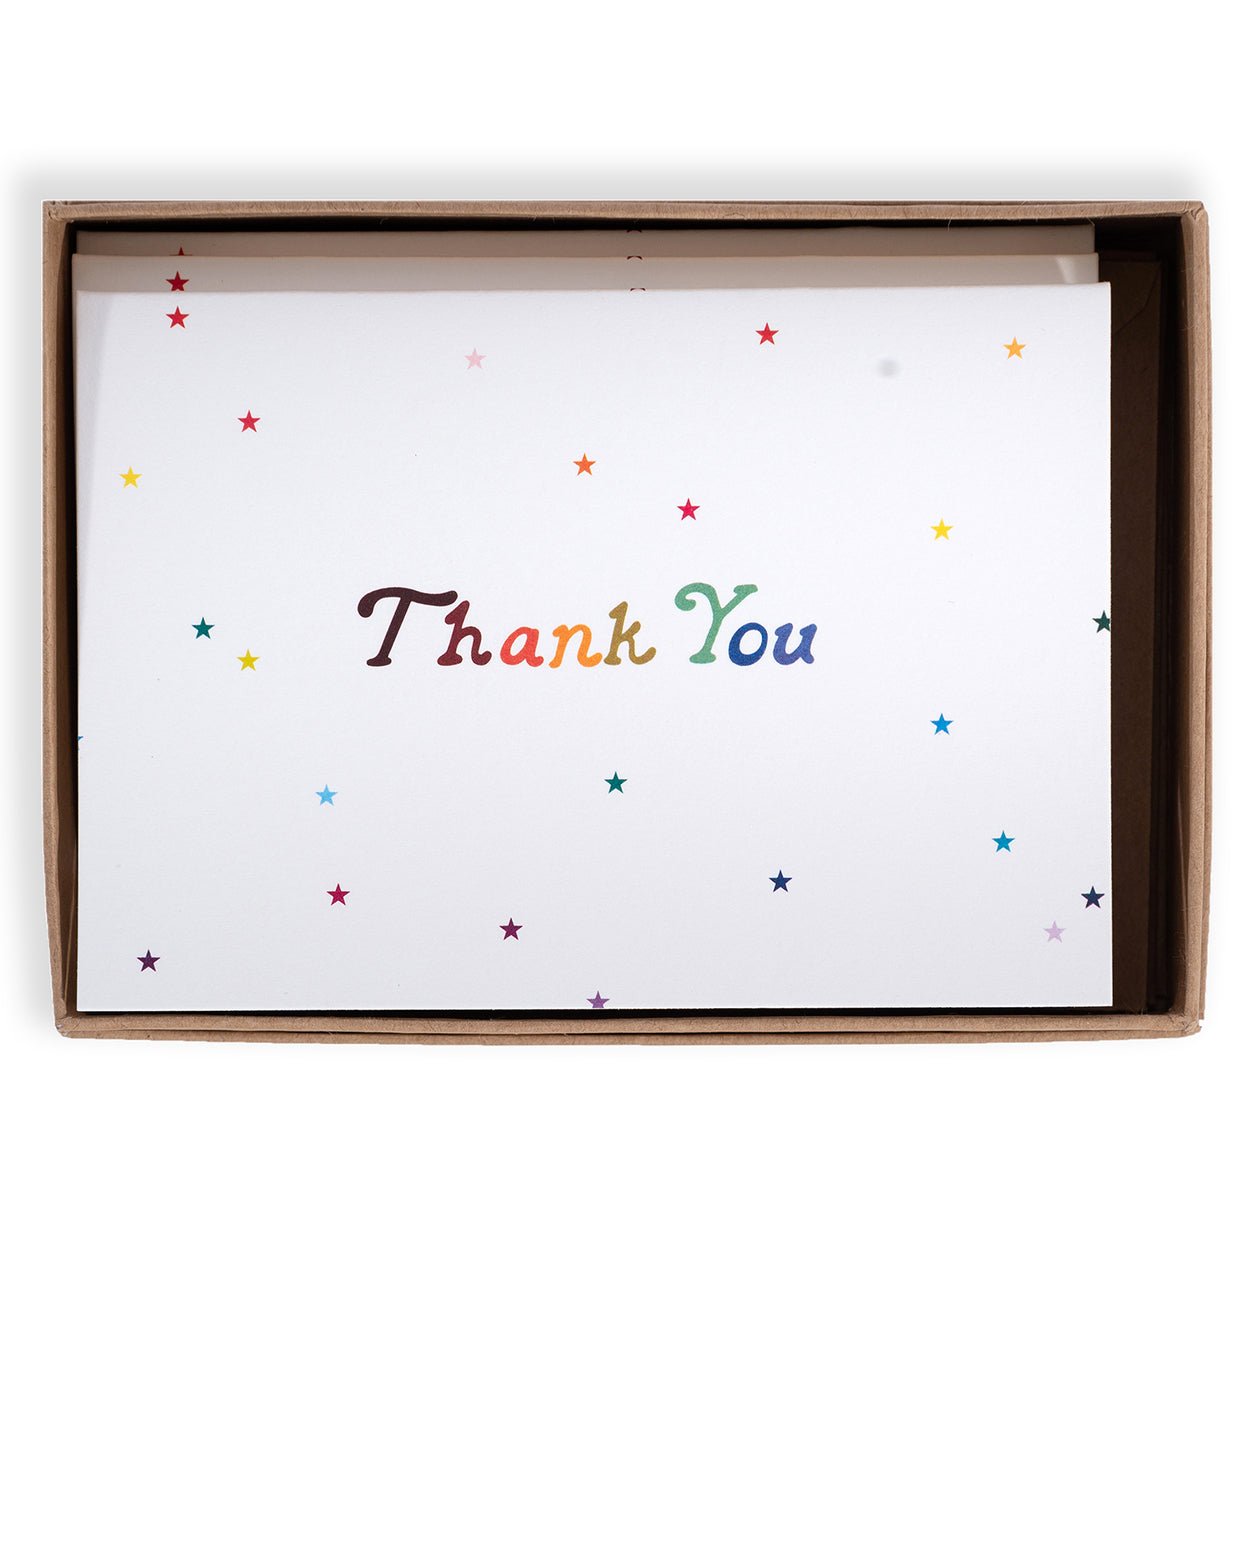  Rainbow stars thank you card with rainbow colored letters printed on white cardstock in kraft packaging.